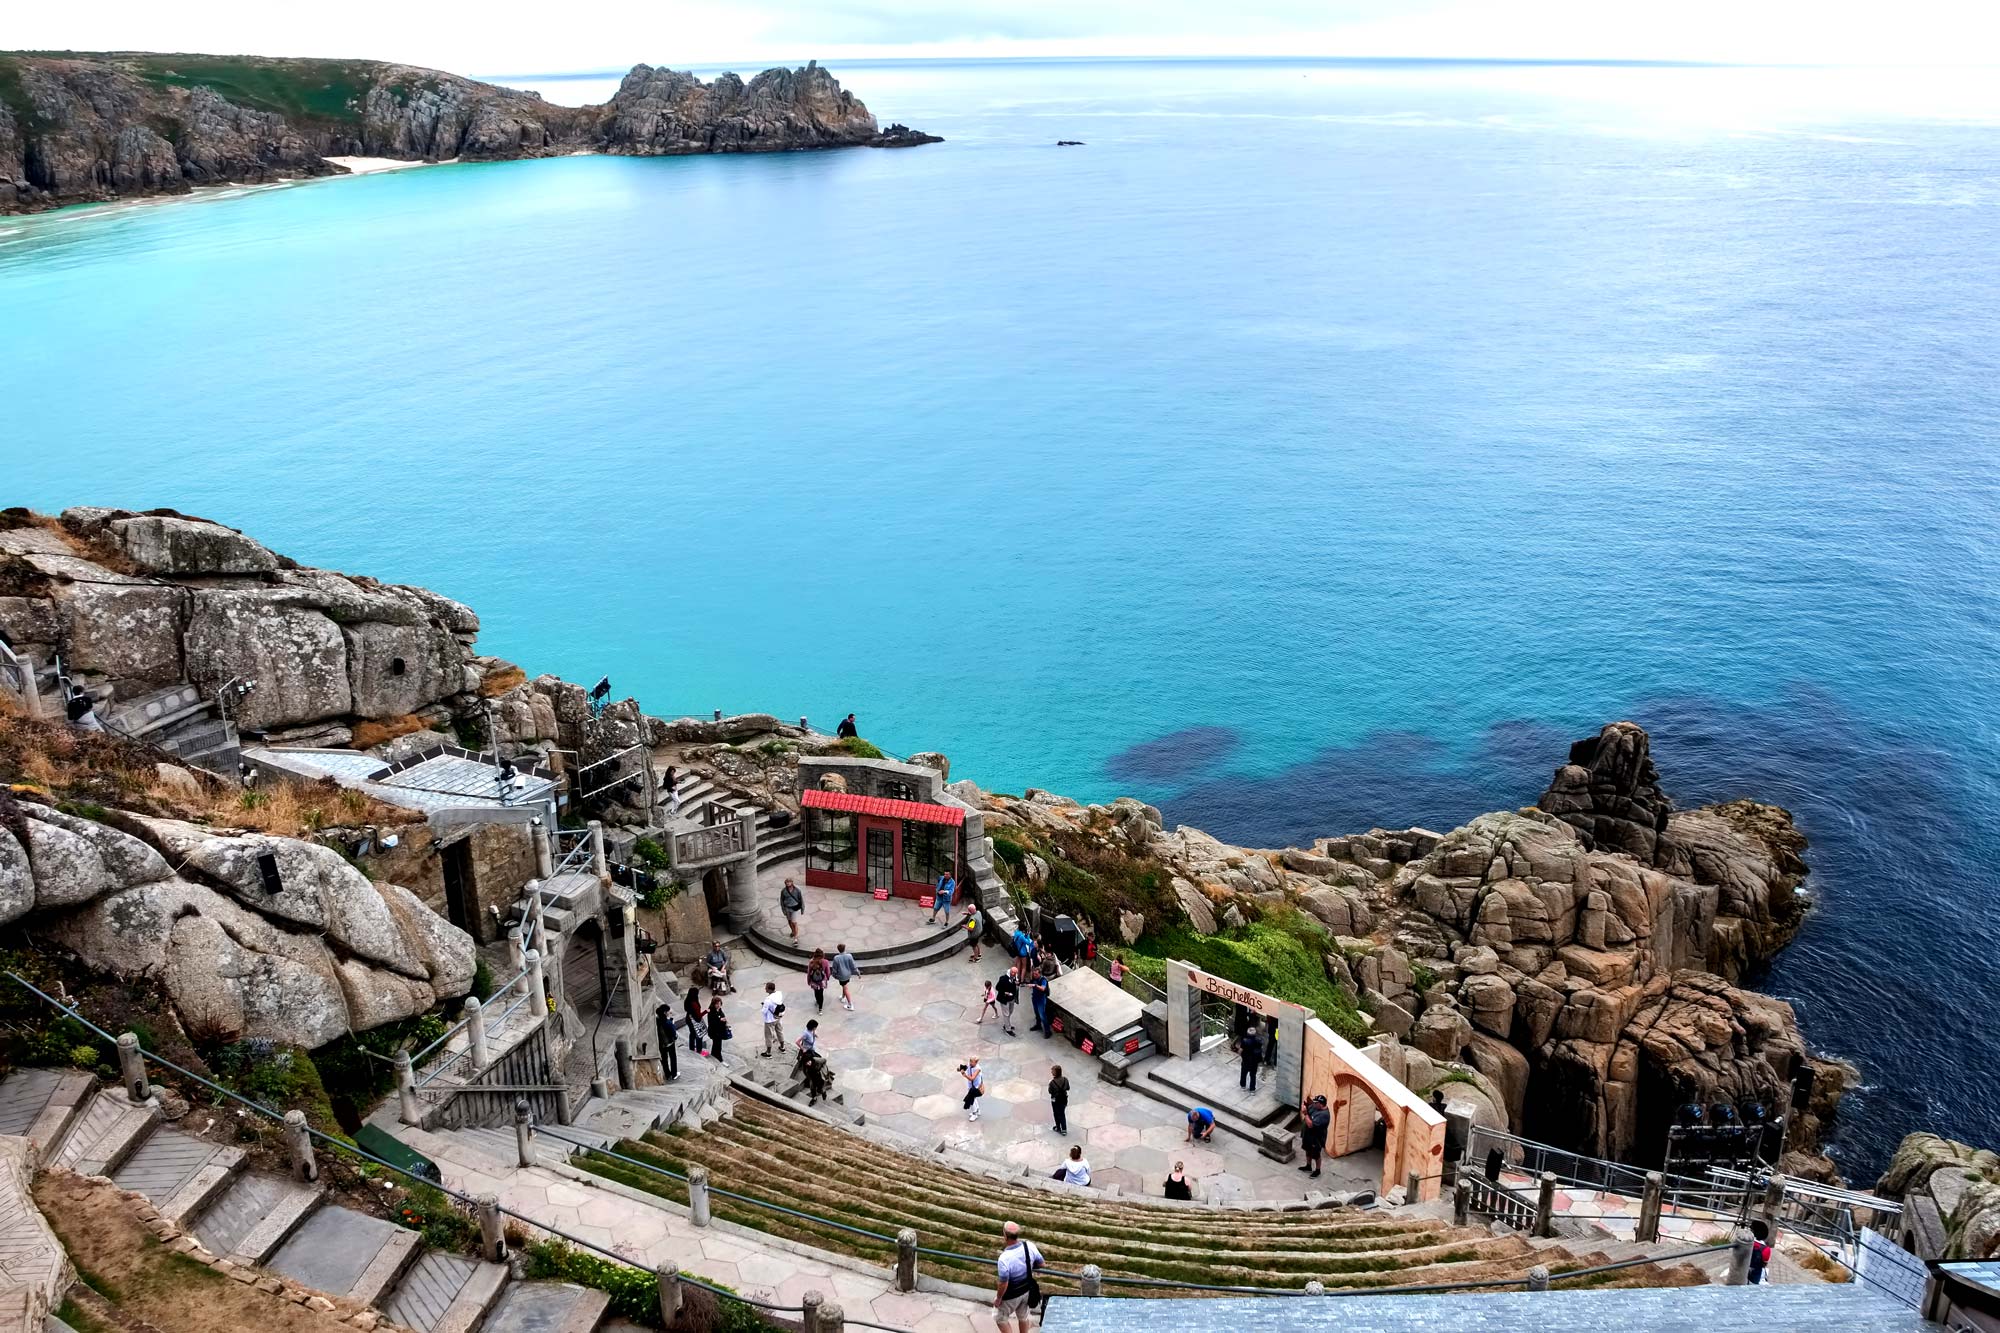 Minack Theatre - A Wonder On It's Own (Around the Corner from Longships)